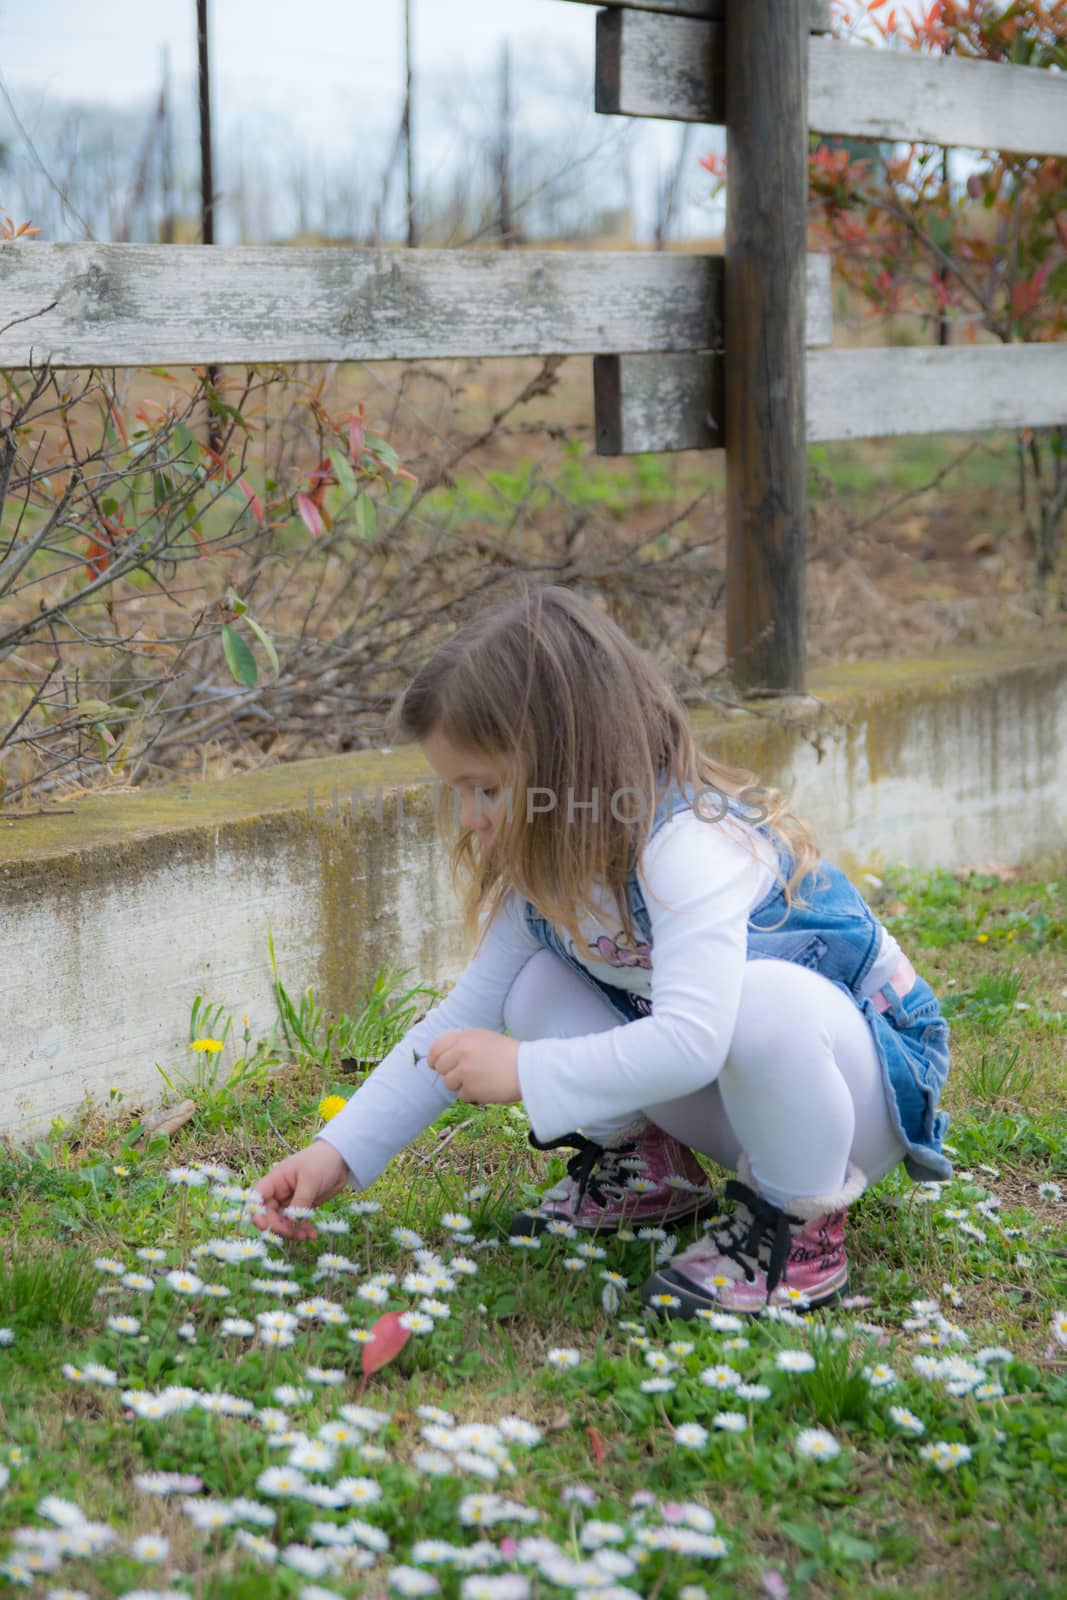 child collects daisies in an outdoor playground